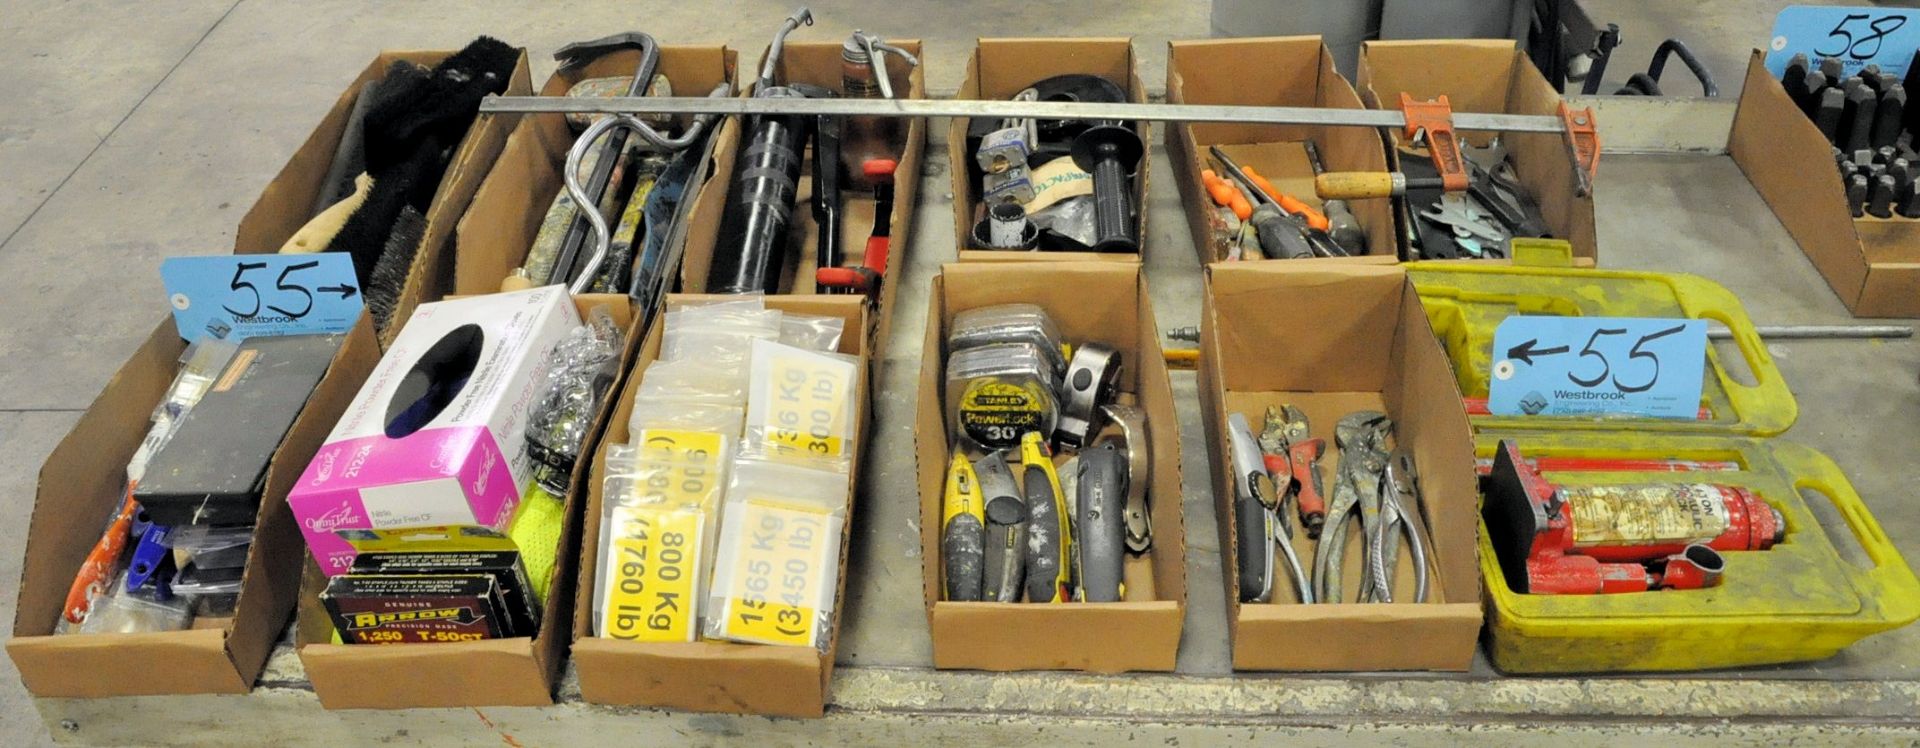 Lot-Asst'd Hand Tools in (11) Boxes with (1) 4-Ton Bottle Jack